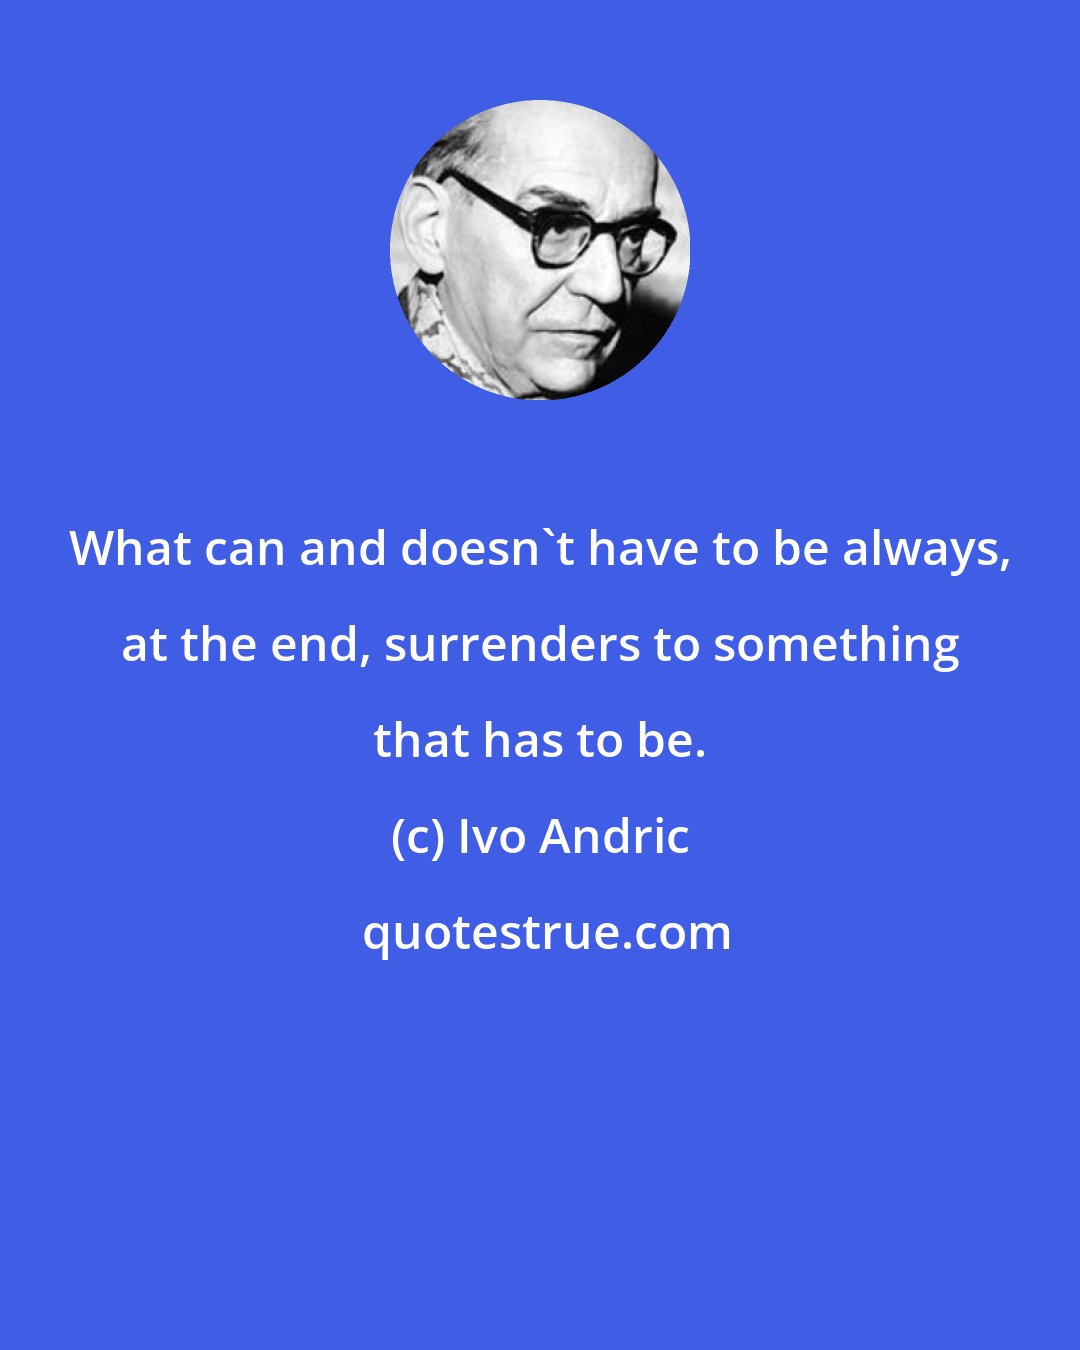 Ivo Andric: What can and doesn't have to be always, at the end, surrenders to something that has to be.